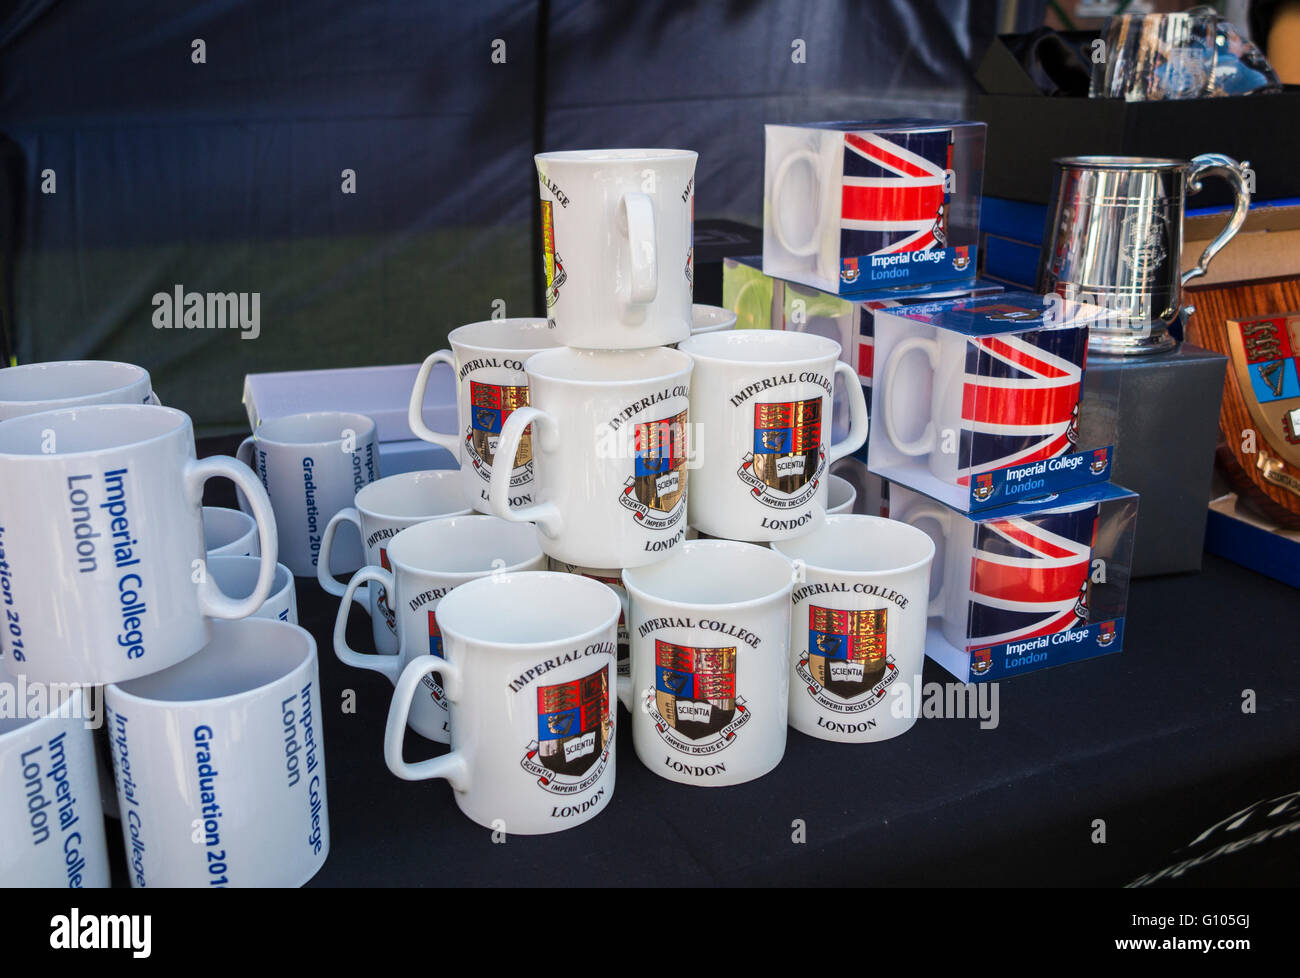 Souvenir mugs with crests and logos on sale at a stall in Imperial College, South Kensington, London before a graduation ceremony in Imperial College Stock Photo